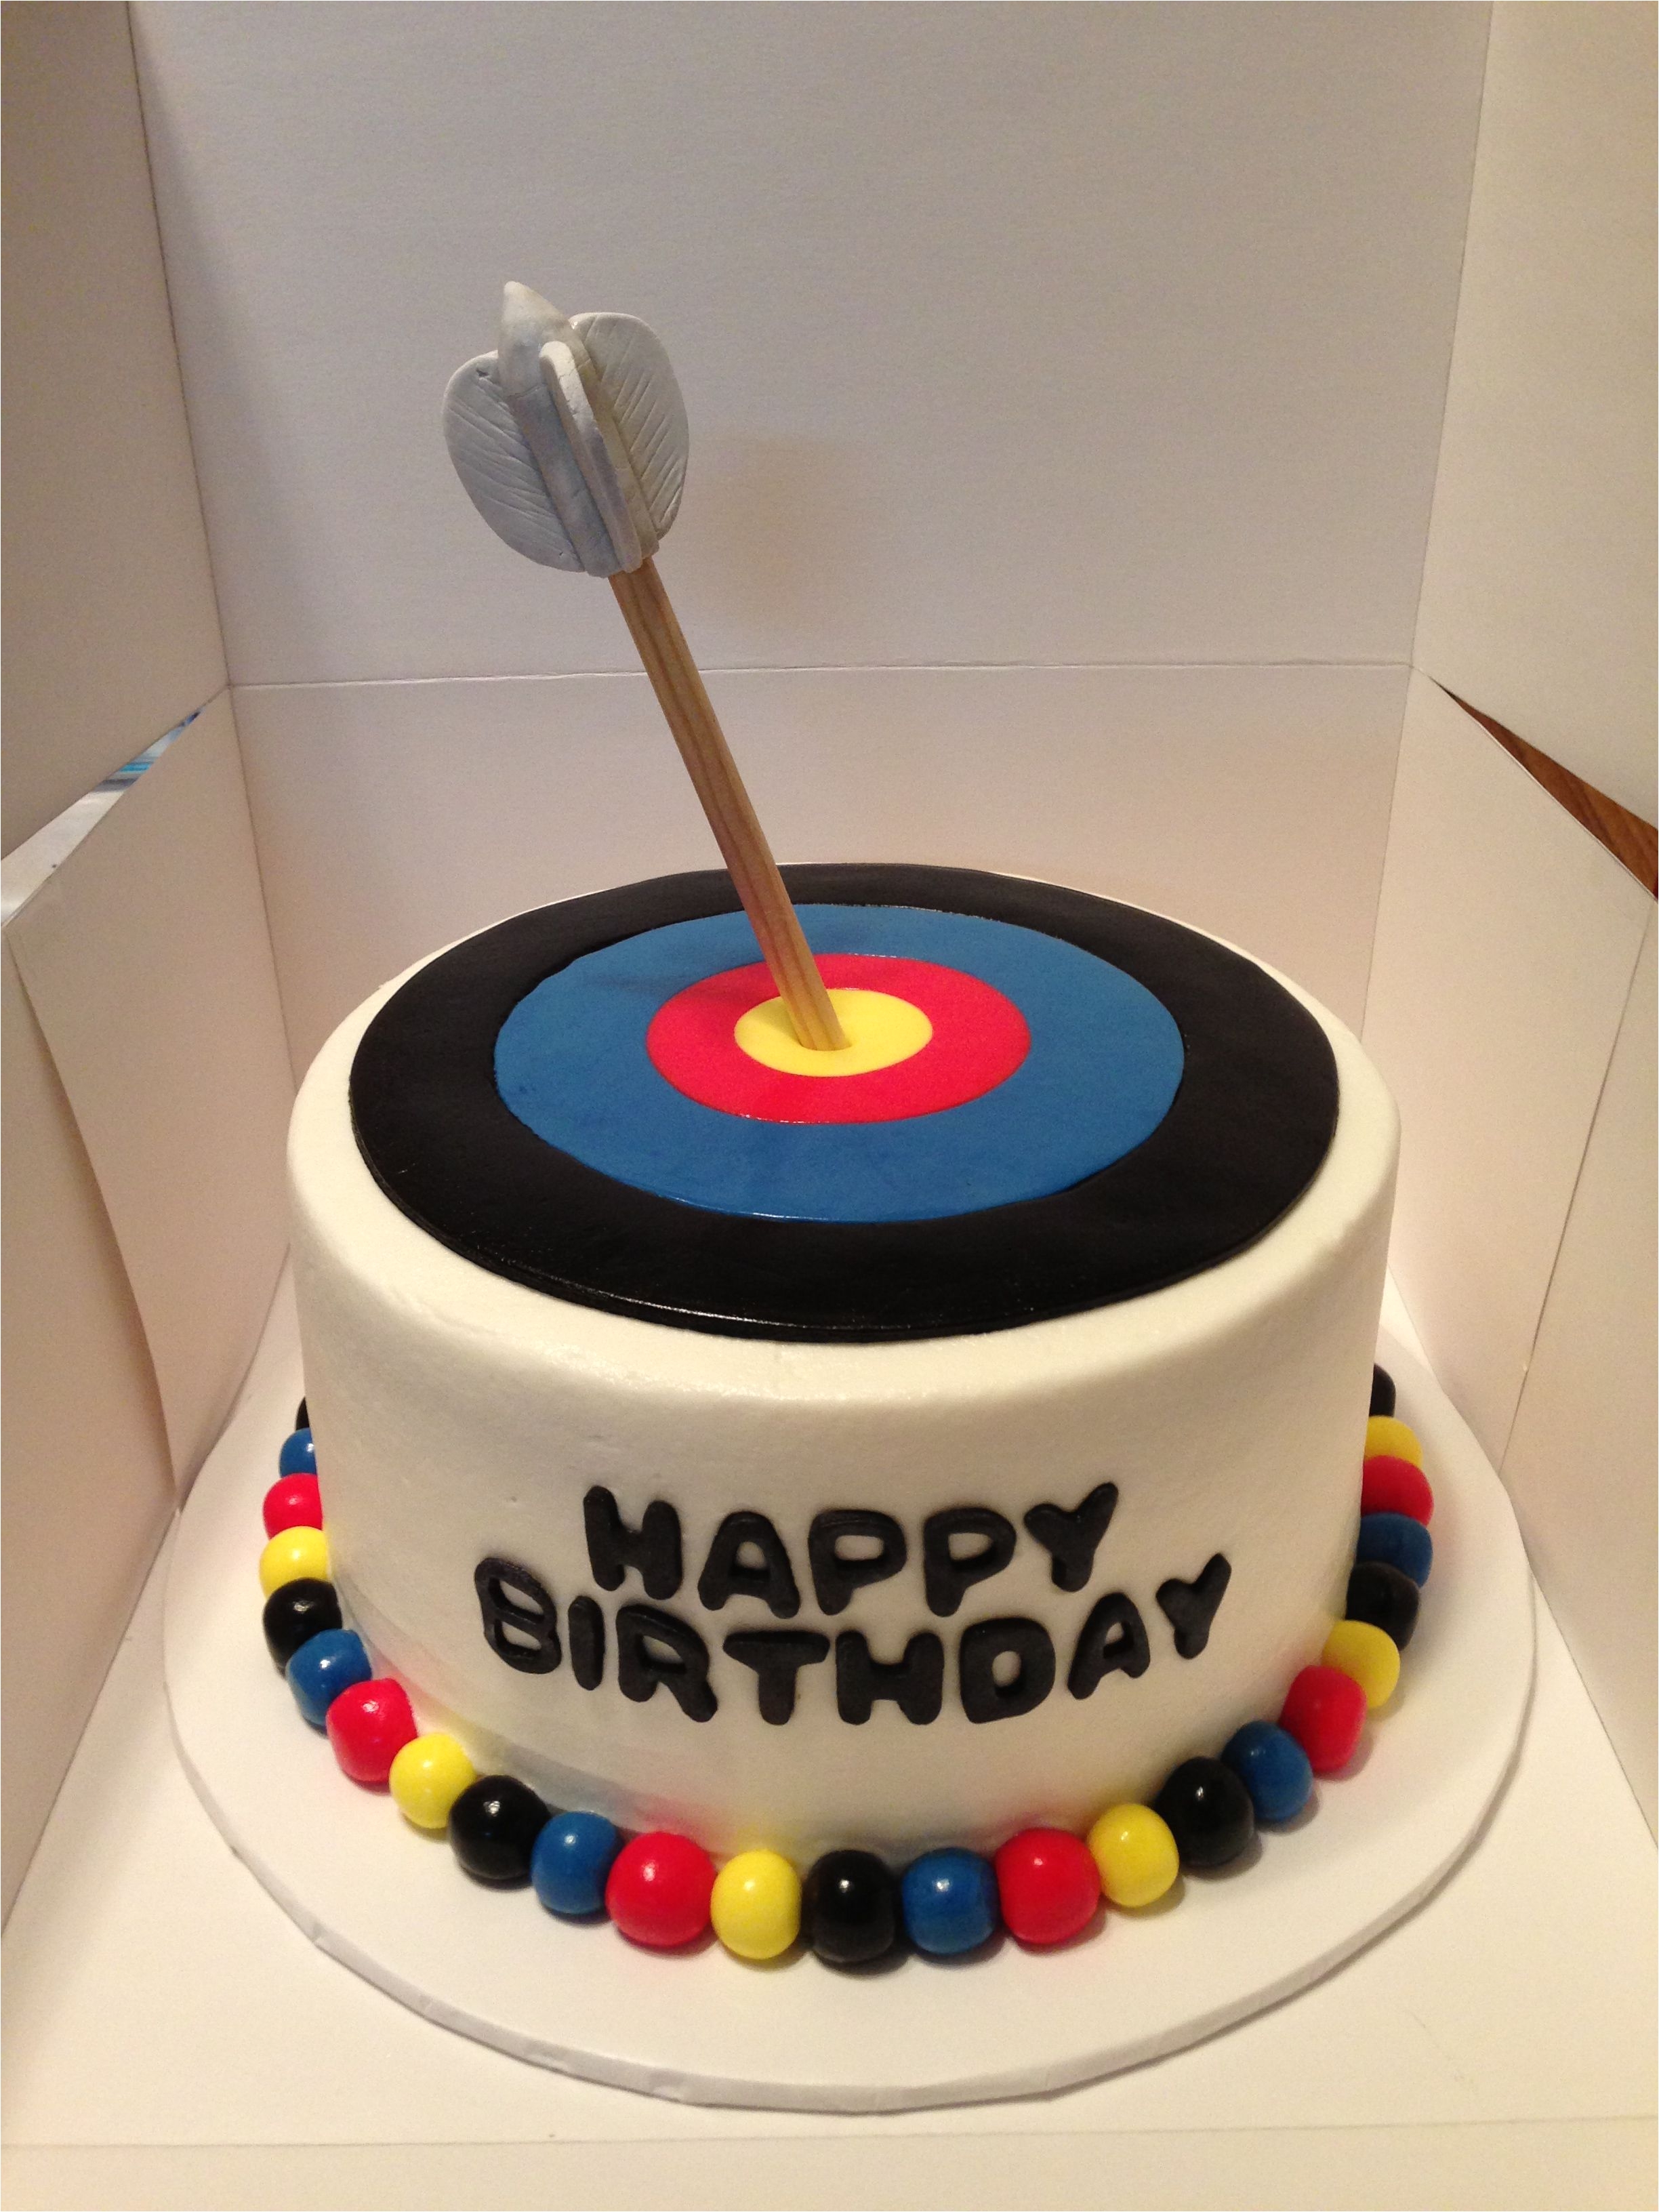 archery target cake fondant target tops an eight inch cake arrow made of wooden dowel with gumpaste feathers